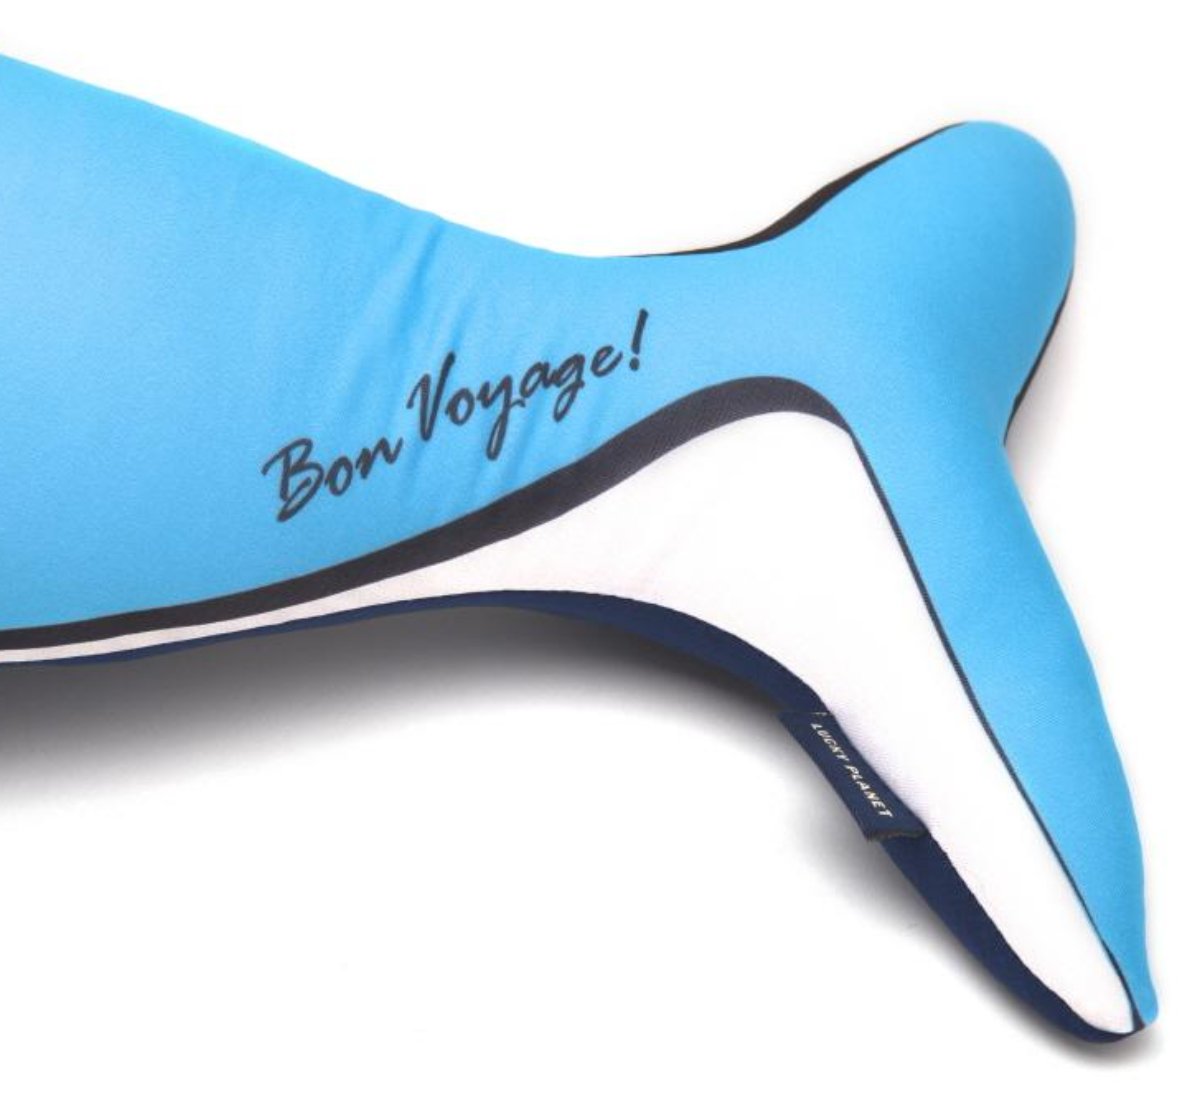 [Lucky Planet] Bon Voyage 2 in1 Travel Head Rest Neck Pillow _Whale - Luckyplanetusa